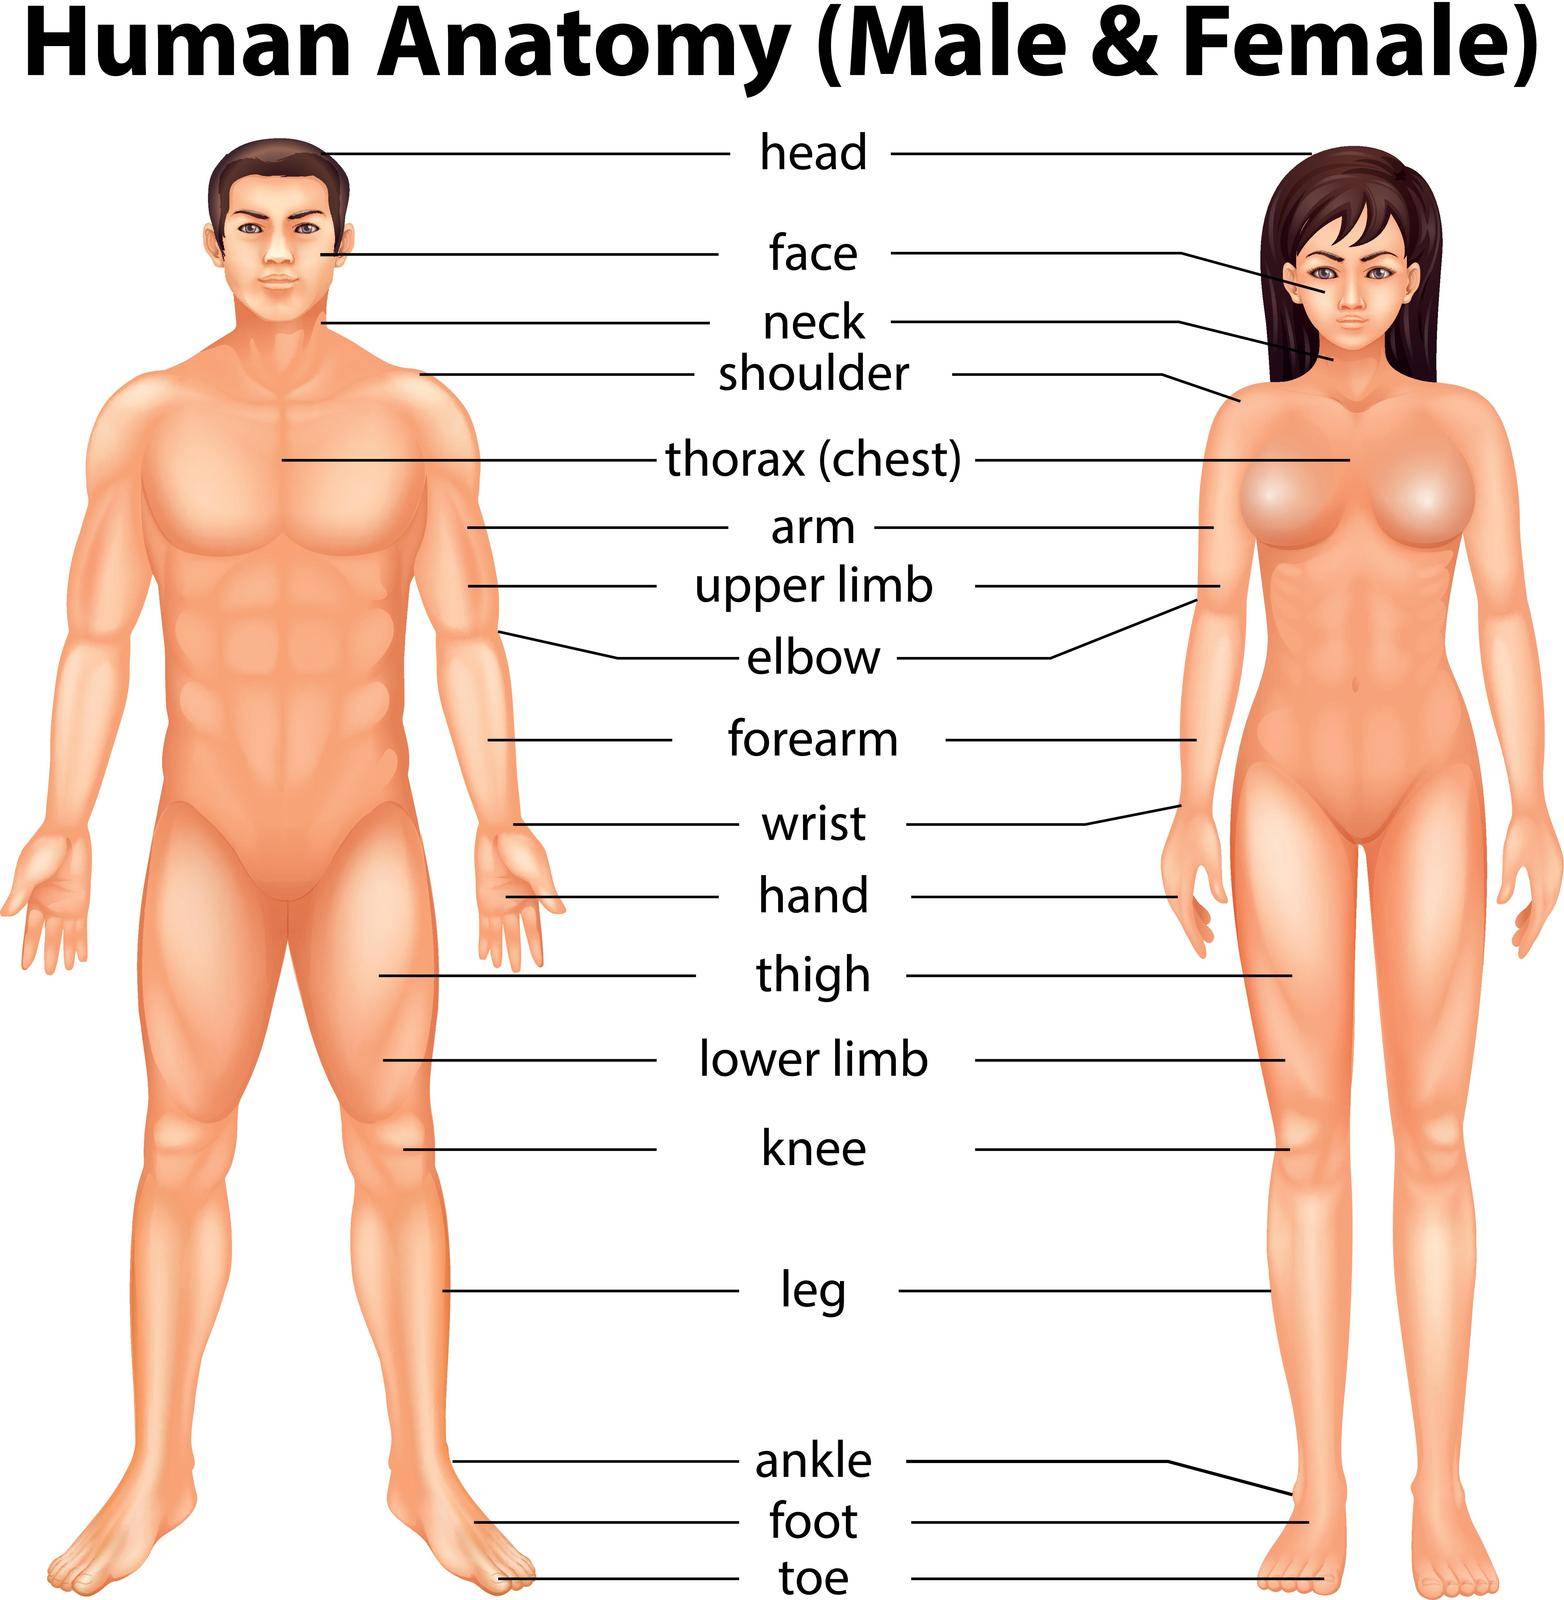 Illustration showing the human body parts